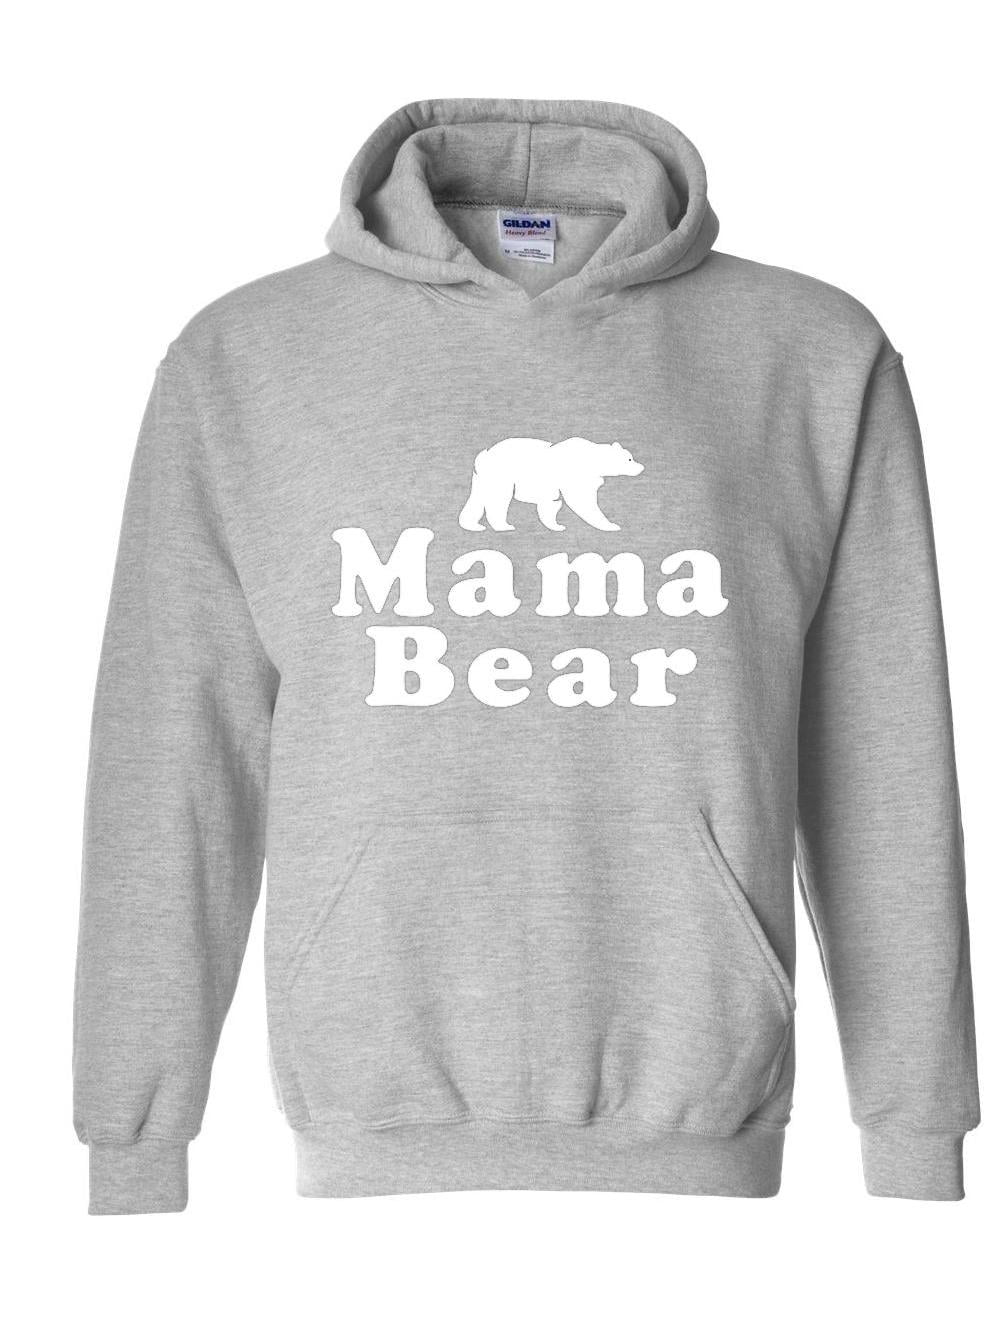 Details about   Mama Bear Gray Unisex Sweatshirt Unique Mothers Day Gift Ideas 